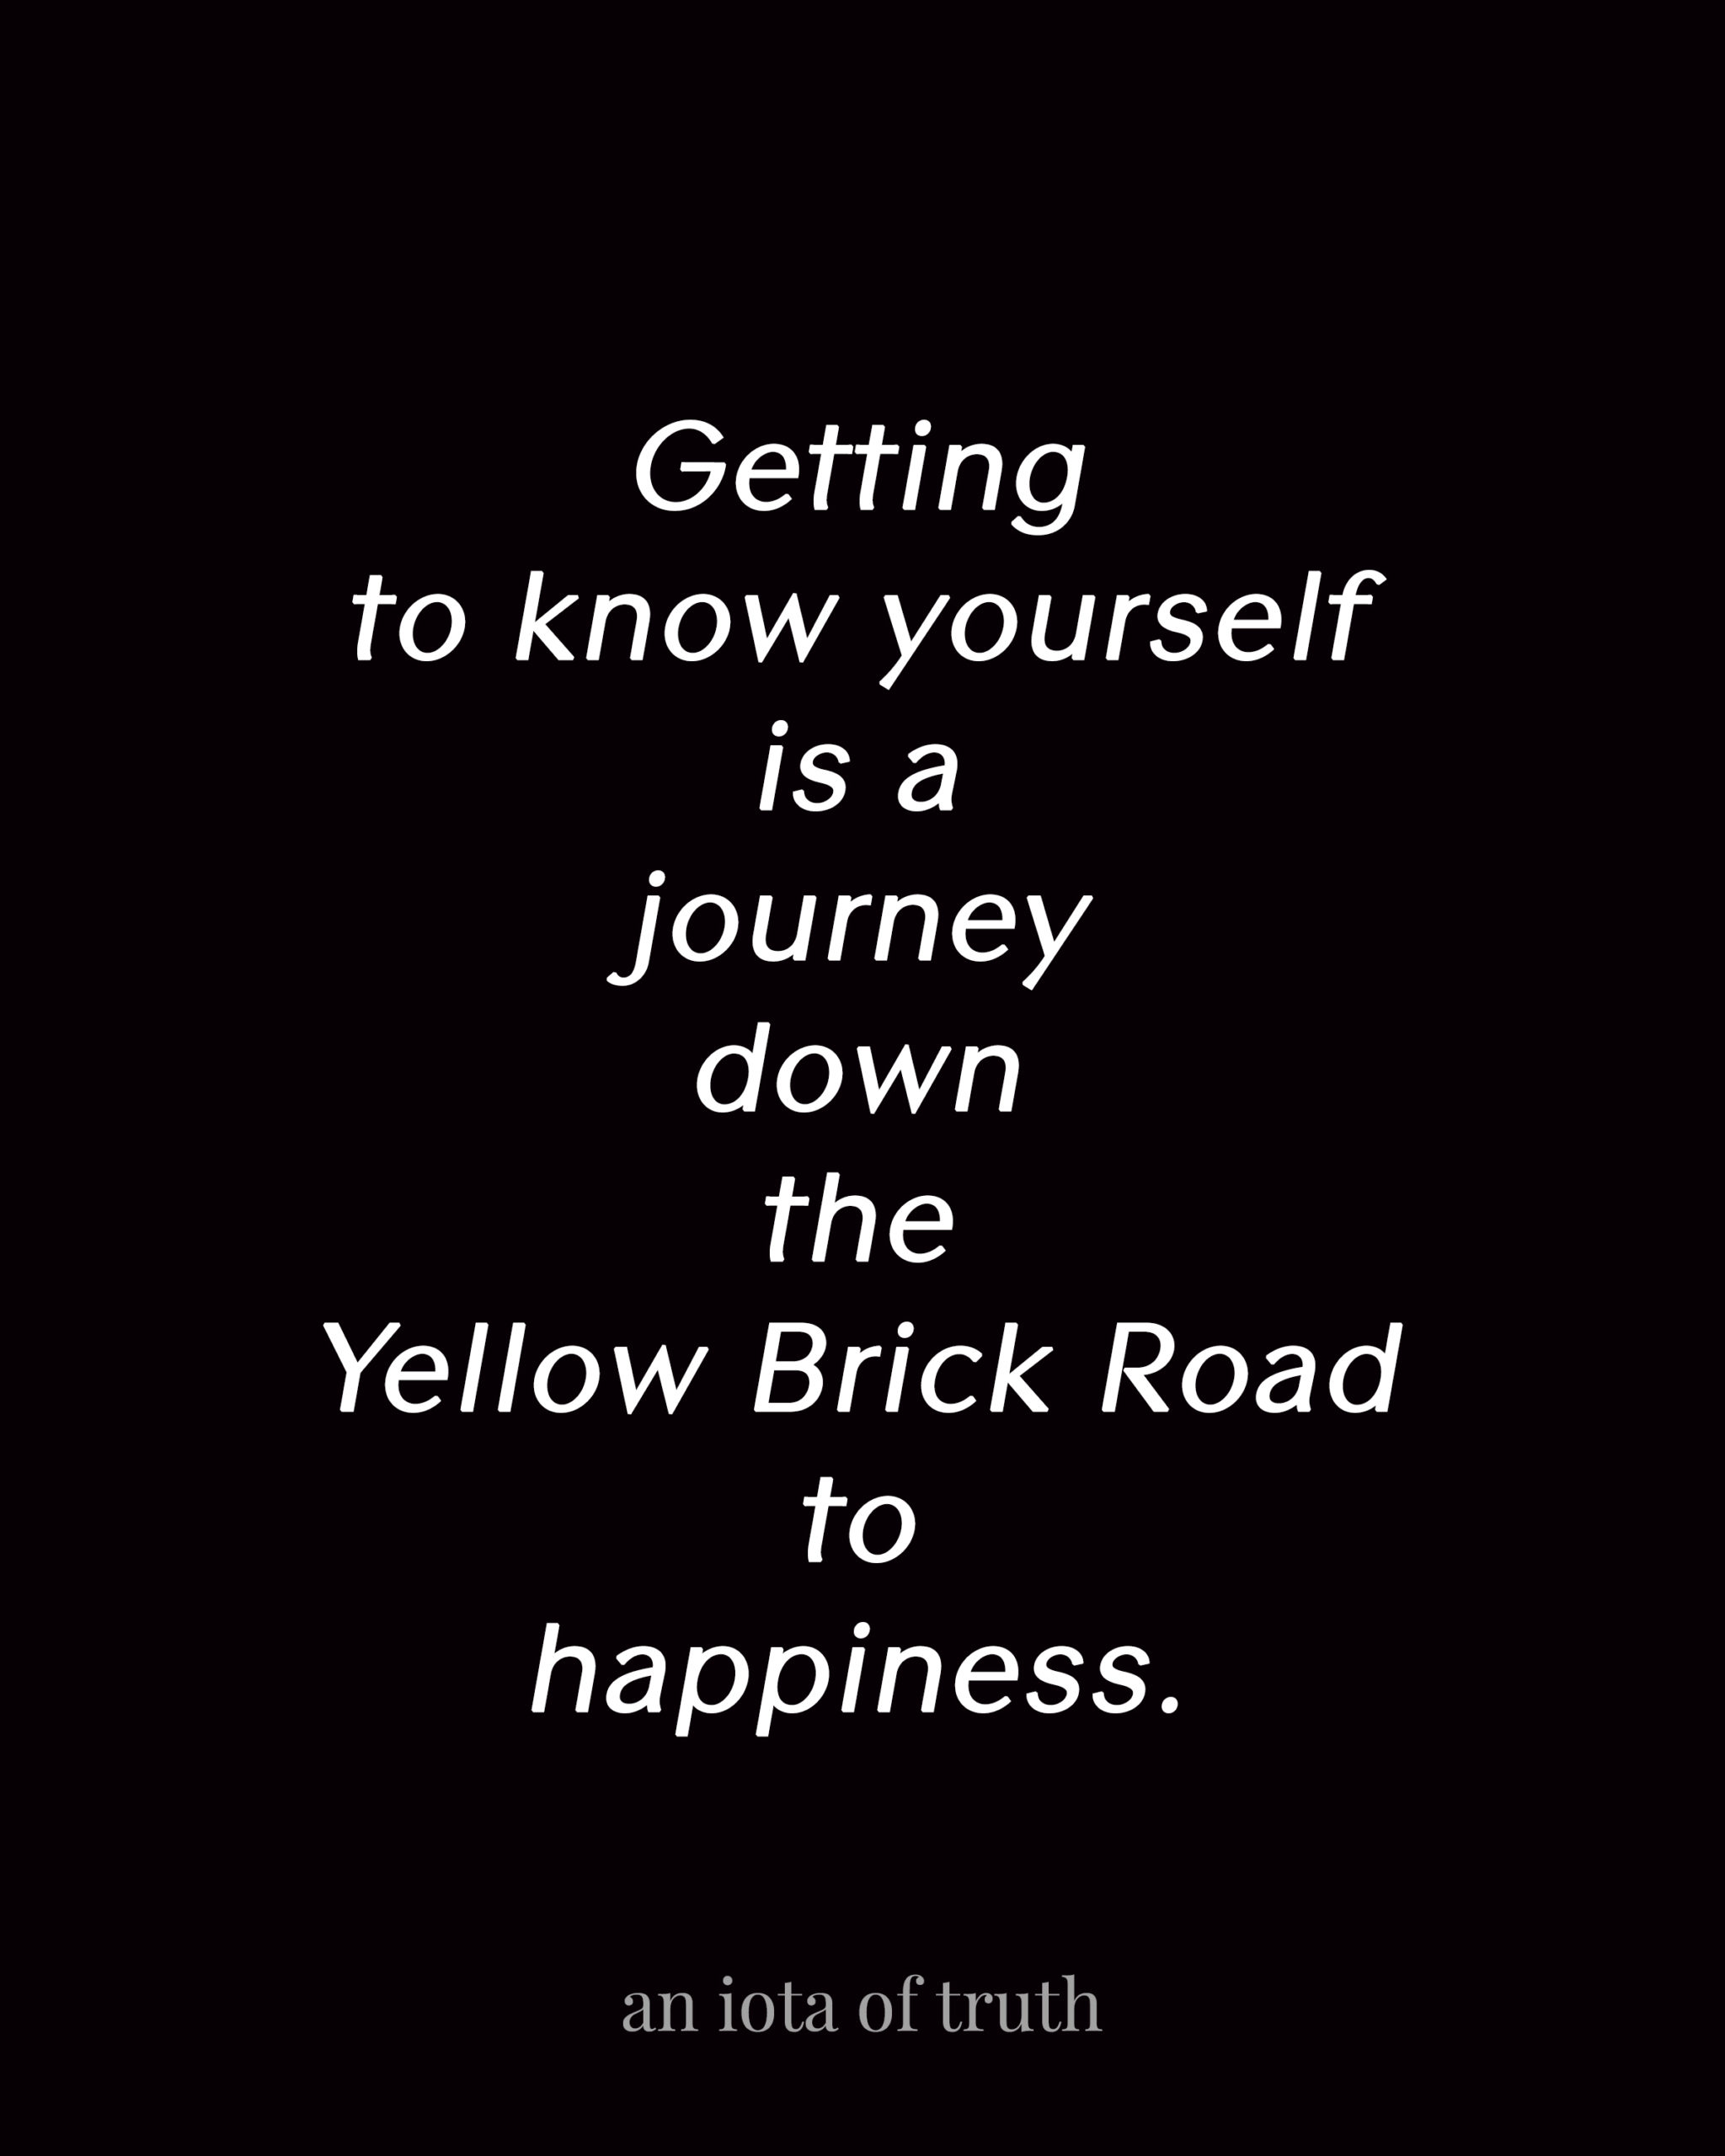 Getting to know yourself is a journey down the Yellow Brick Road to happiness.